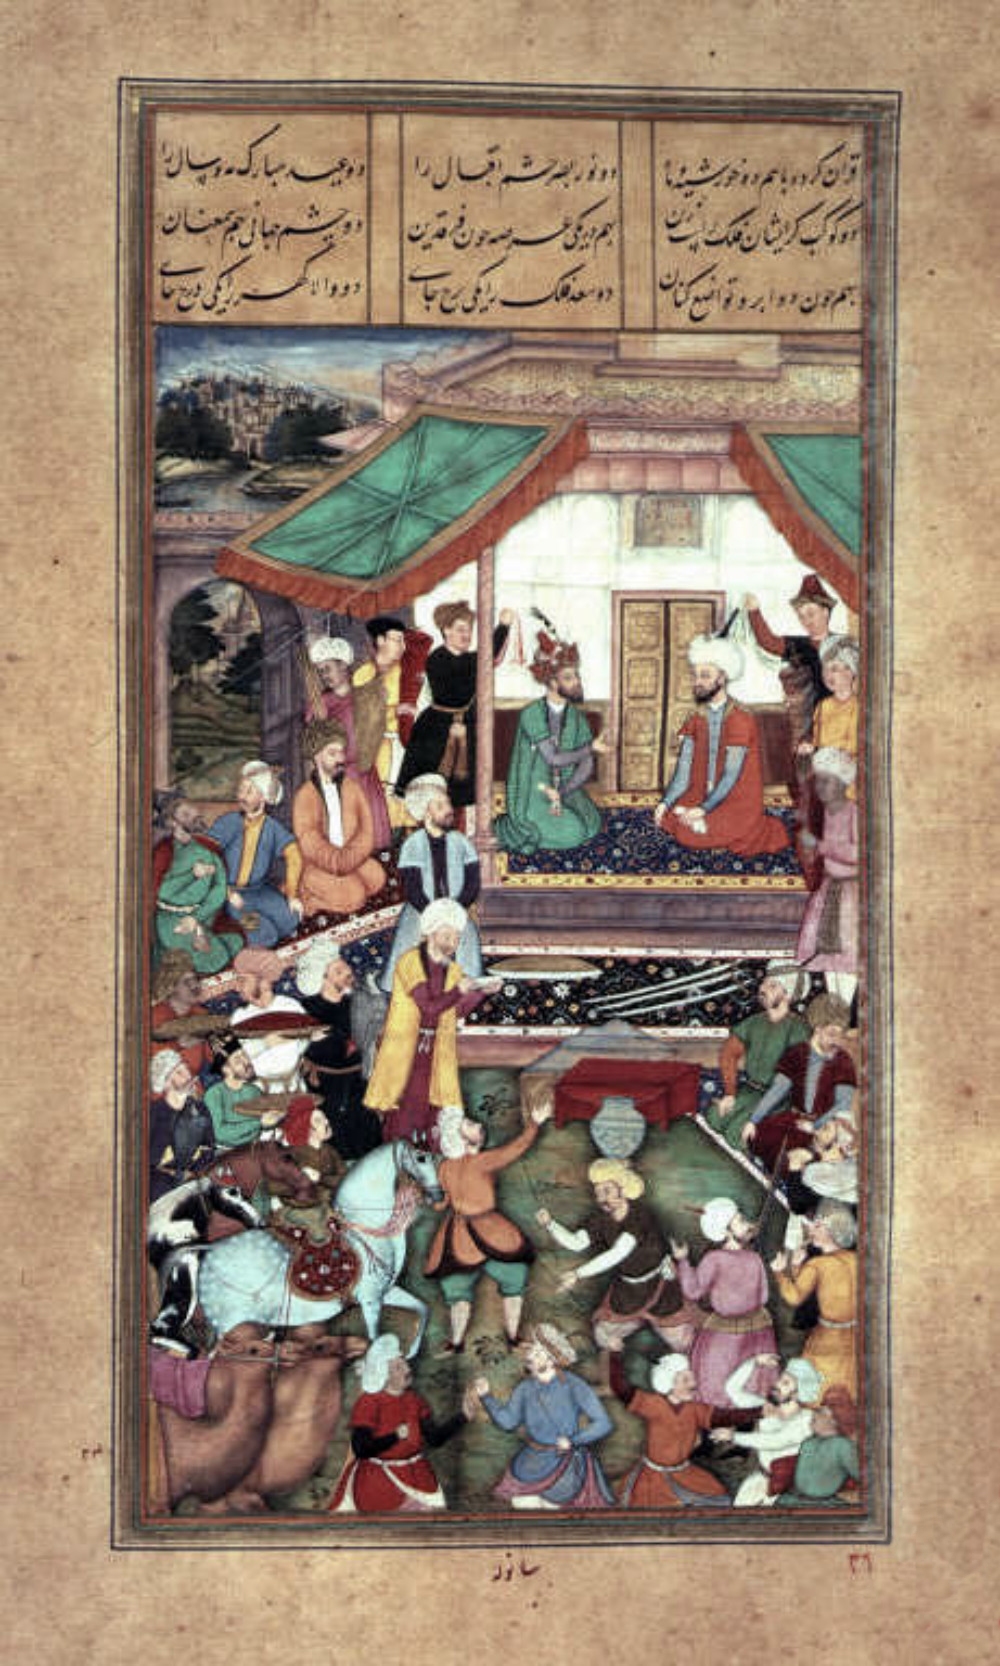 Shah Tahmasp provided Humayun with 12,000 cavalry and 300 veterans of his personal guard along with provisions, so that his guests may recover their lost domains